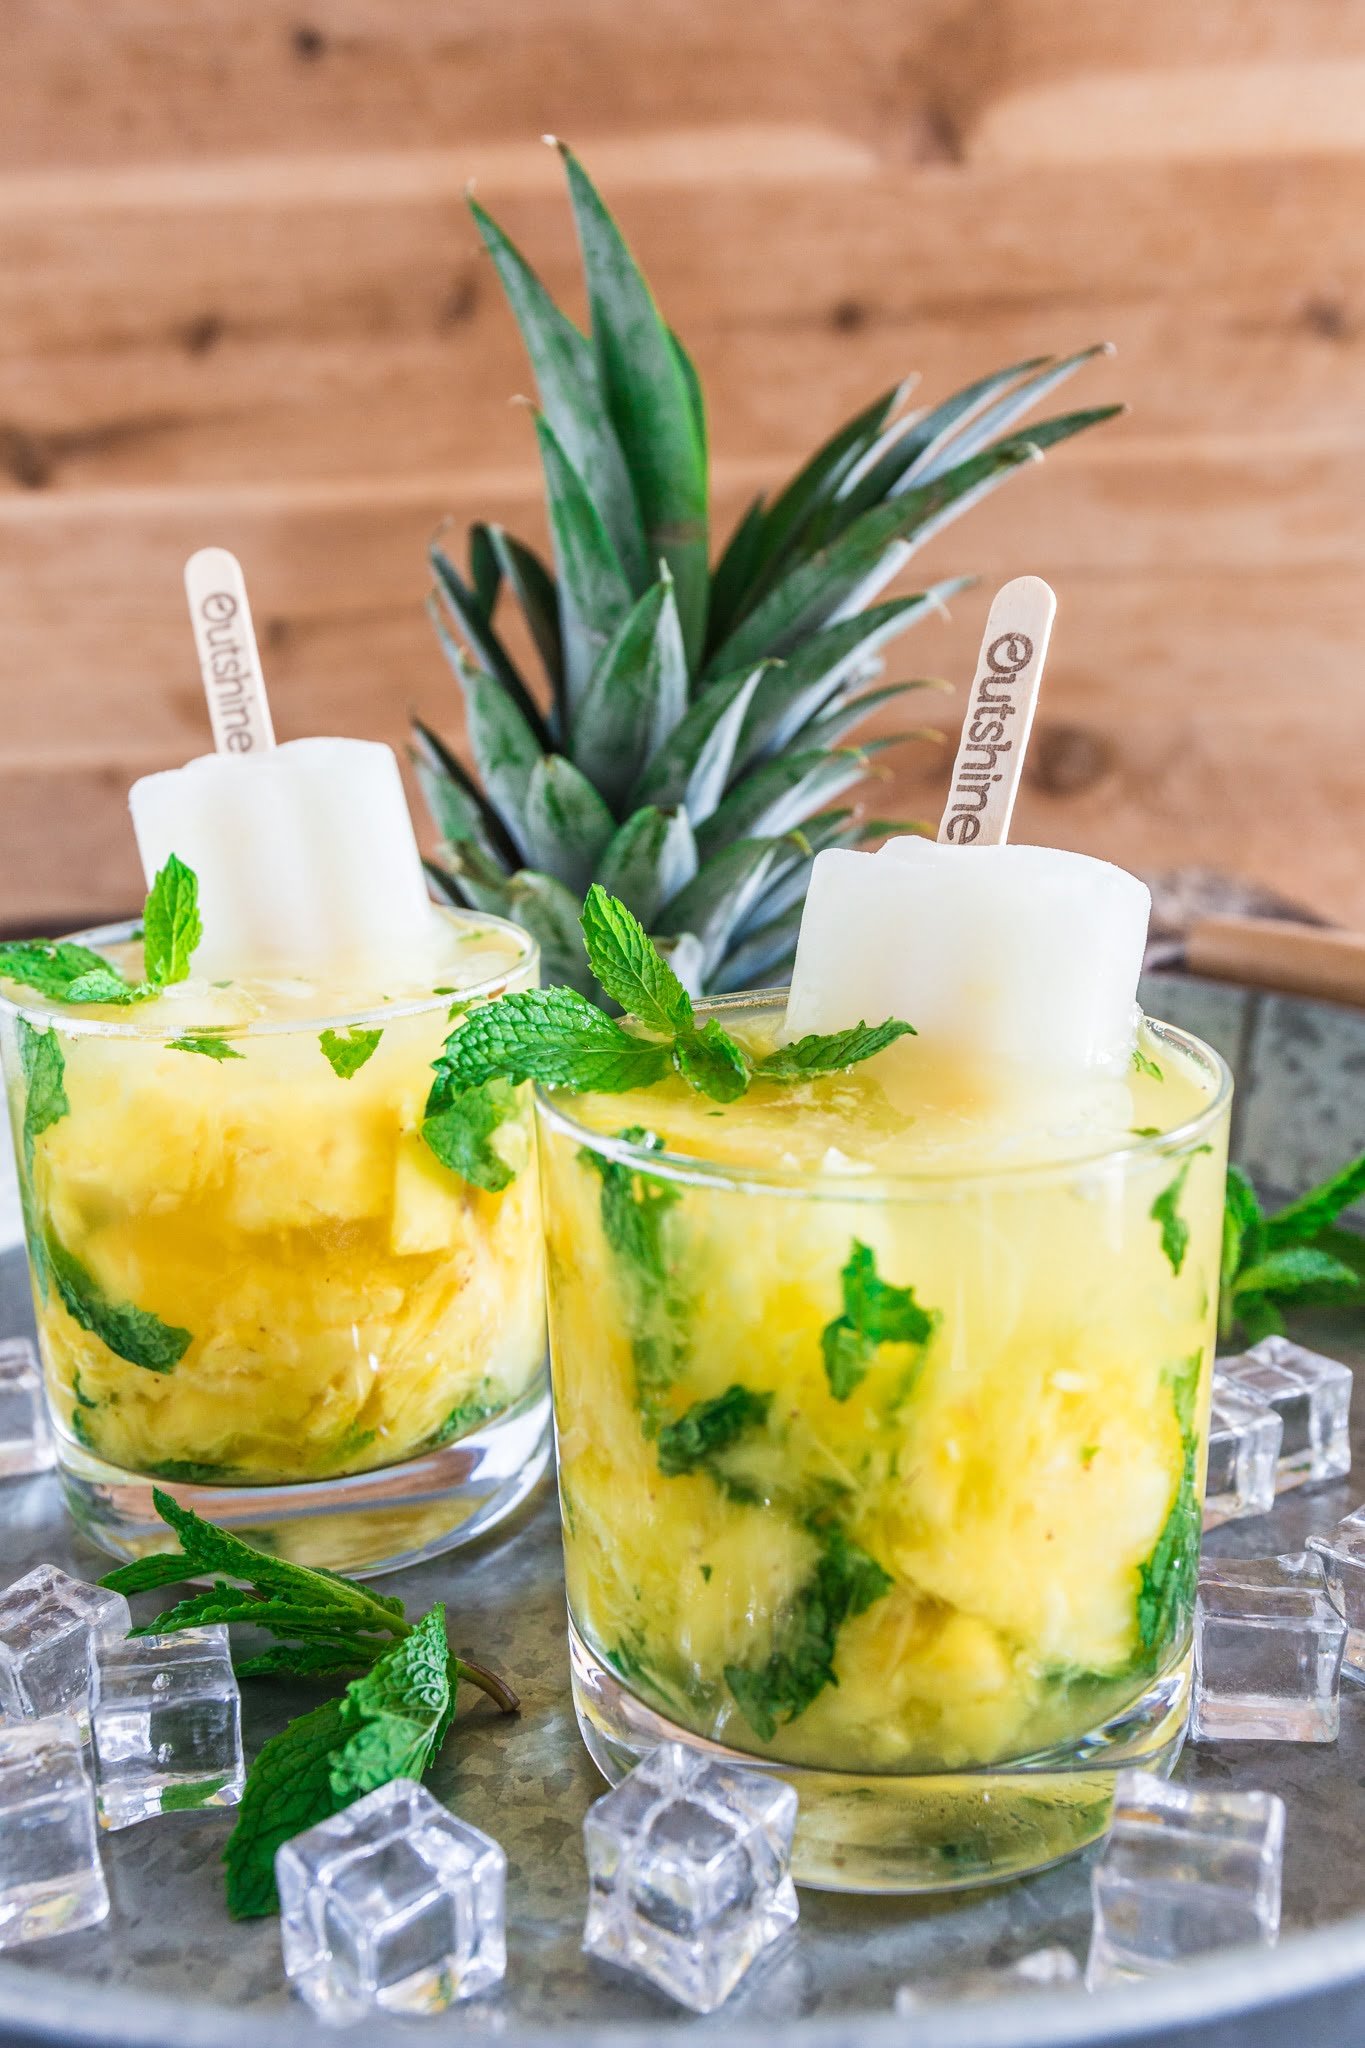 Pineapple Mint Fruit Bar Caipirinha | www.oliviascuisine.com | Summer is almost here and this Pineapple Mint Fruit Bar Caipirinha will be the hit of your parties! Sweet, refreshing and very easy to make. Who doesn't love that? (Recipe by @oliviascuisine.)